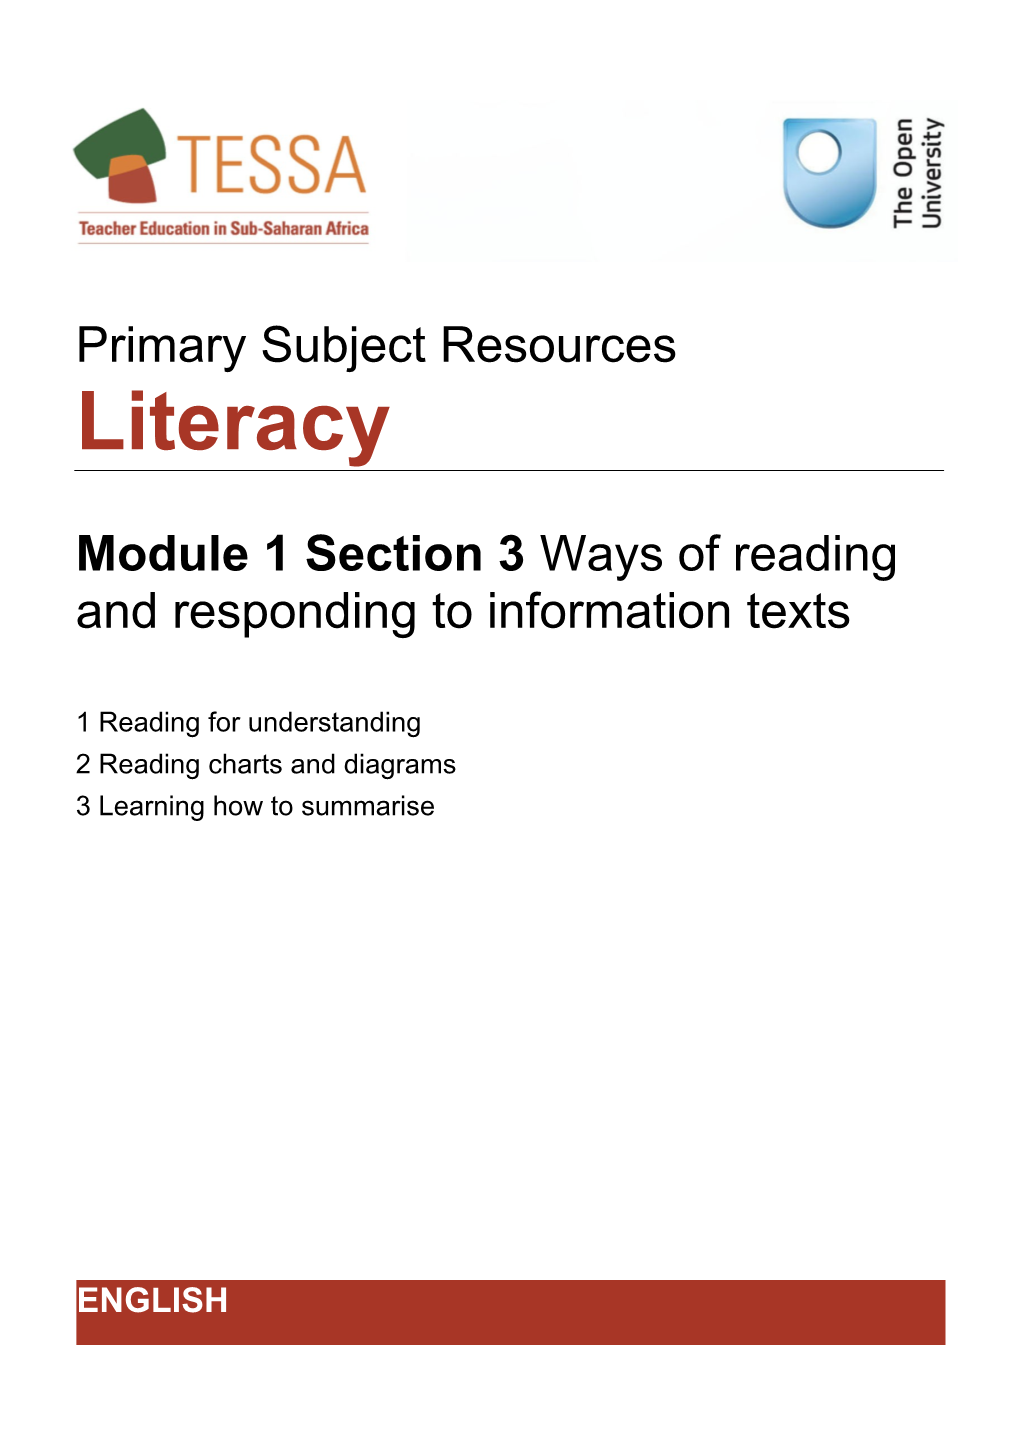 Section 3: Ways of Reading and Responding to Information Texts